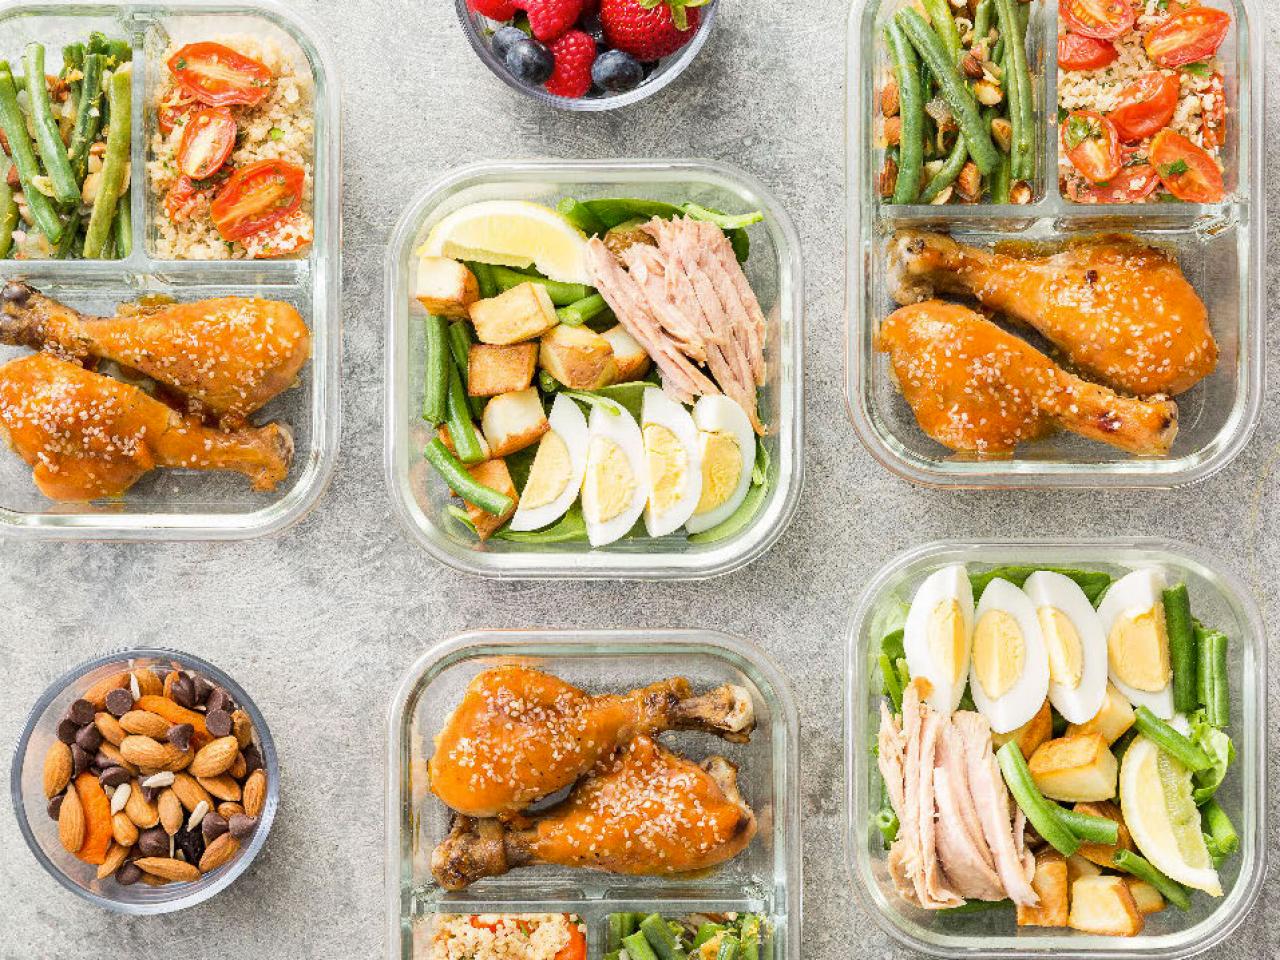 8 Products That Make Meal Prep Easier from Kohl's, Shopping : Food Network